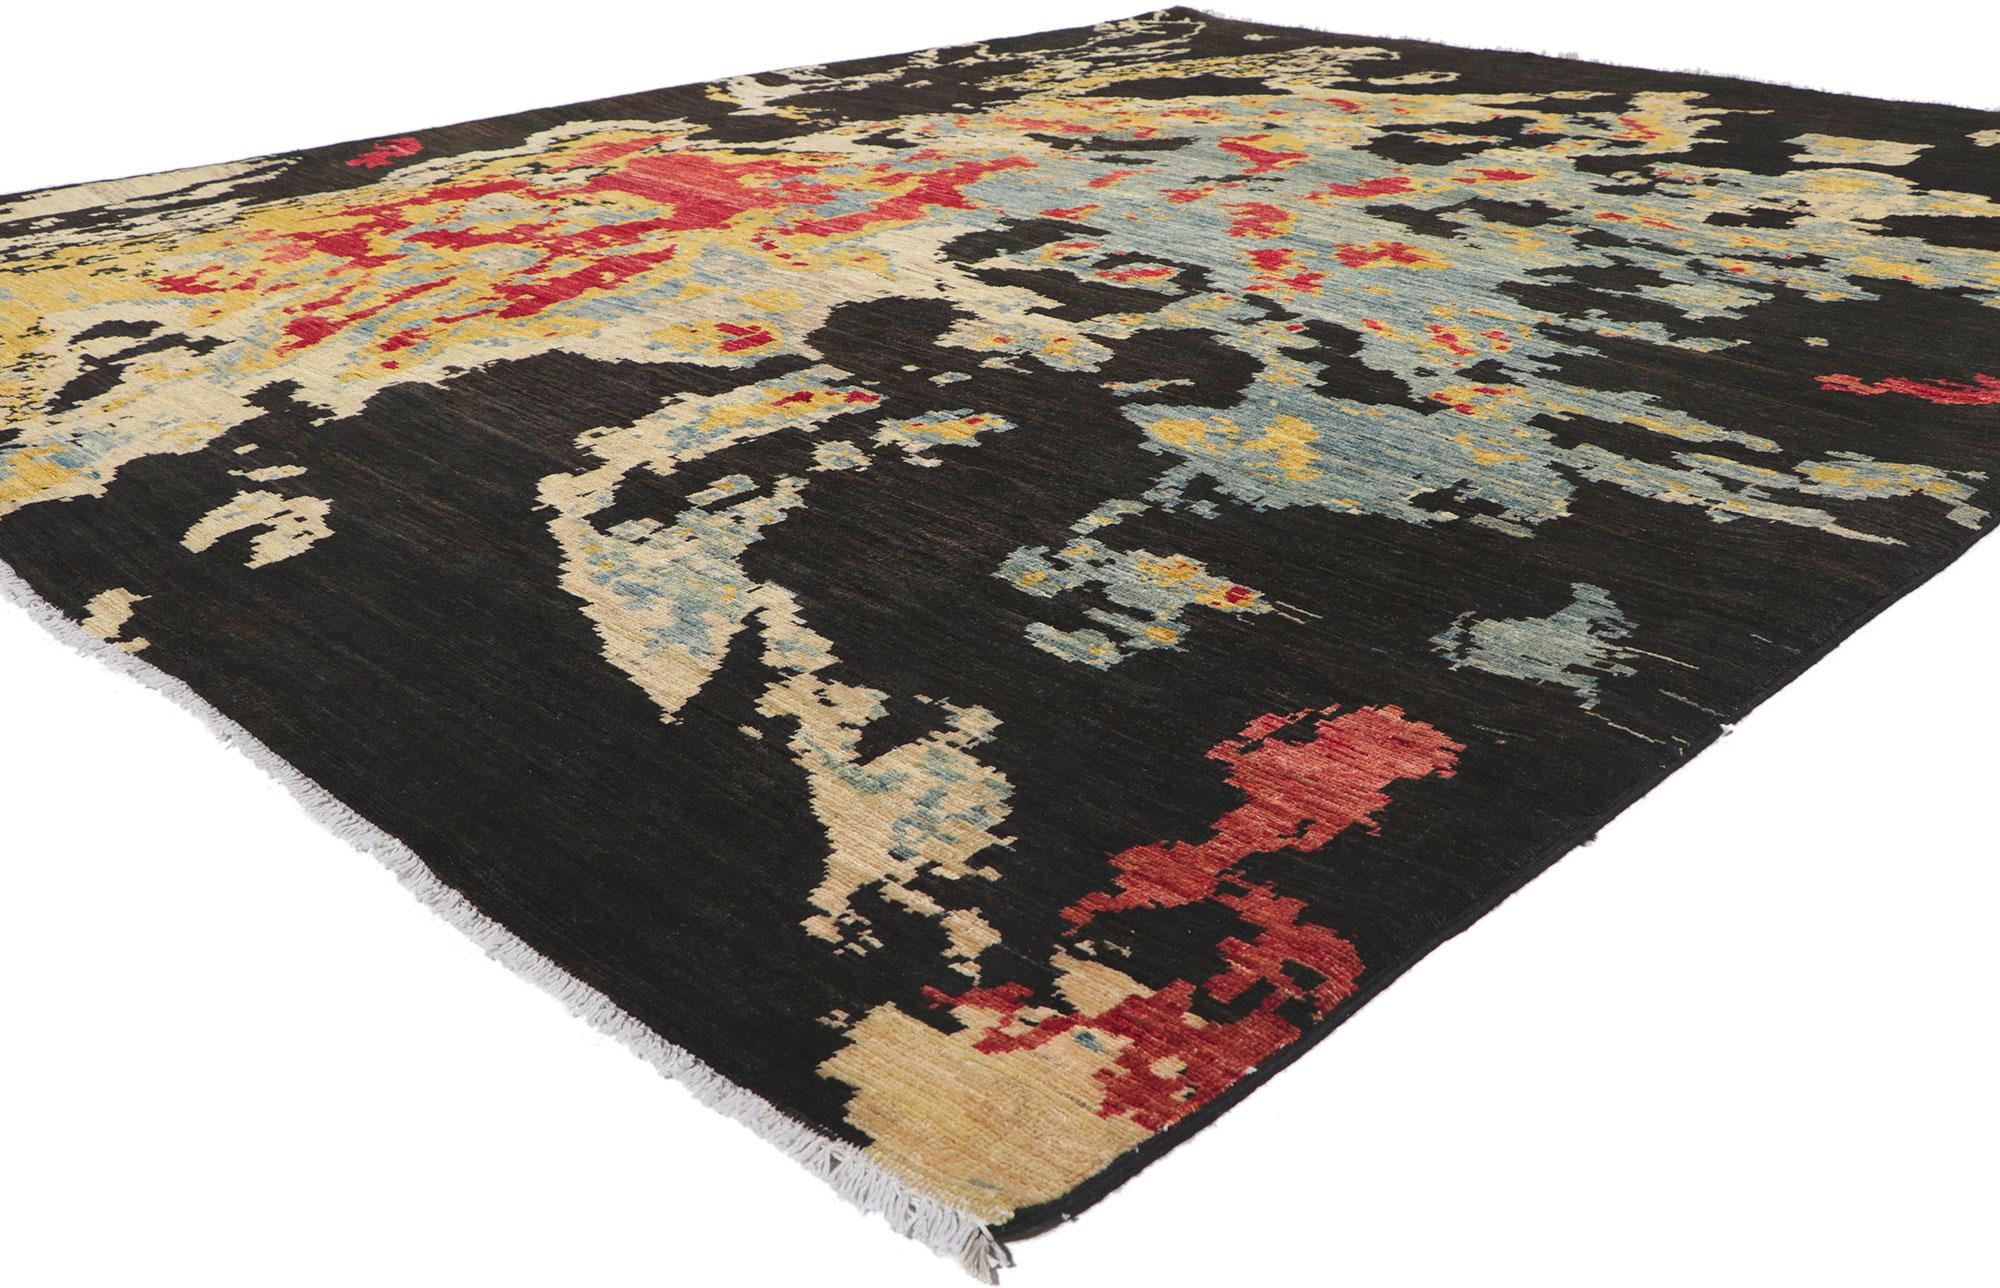 ?80754 New Contemporary area rug inspired by Jackson Pollock 07'11 x 09'09. Showcasing an abstract expressive design, incredible detail and texture, this hand knotted wool contemporary area rug is a captivating vision of woven beauty. The